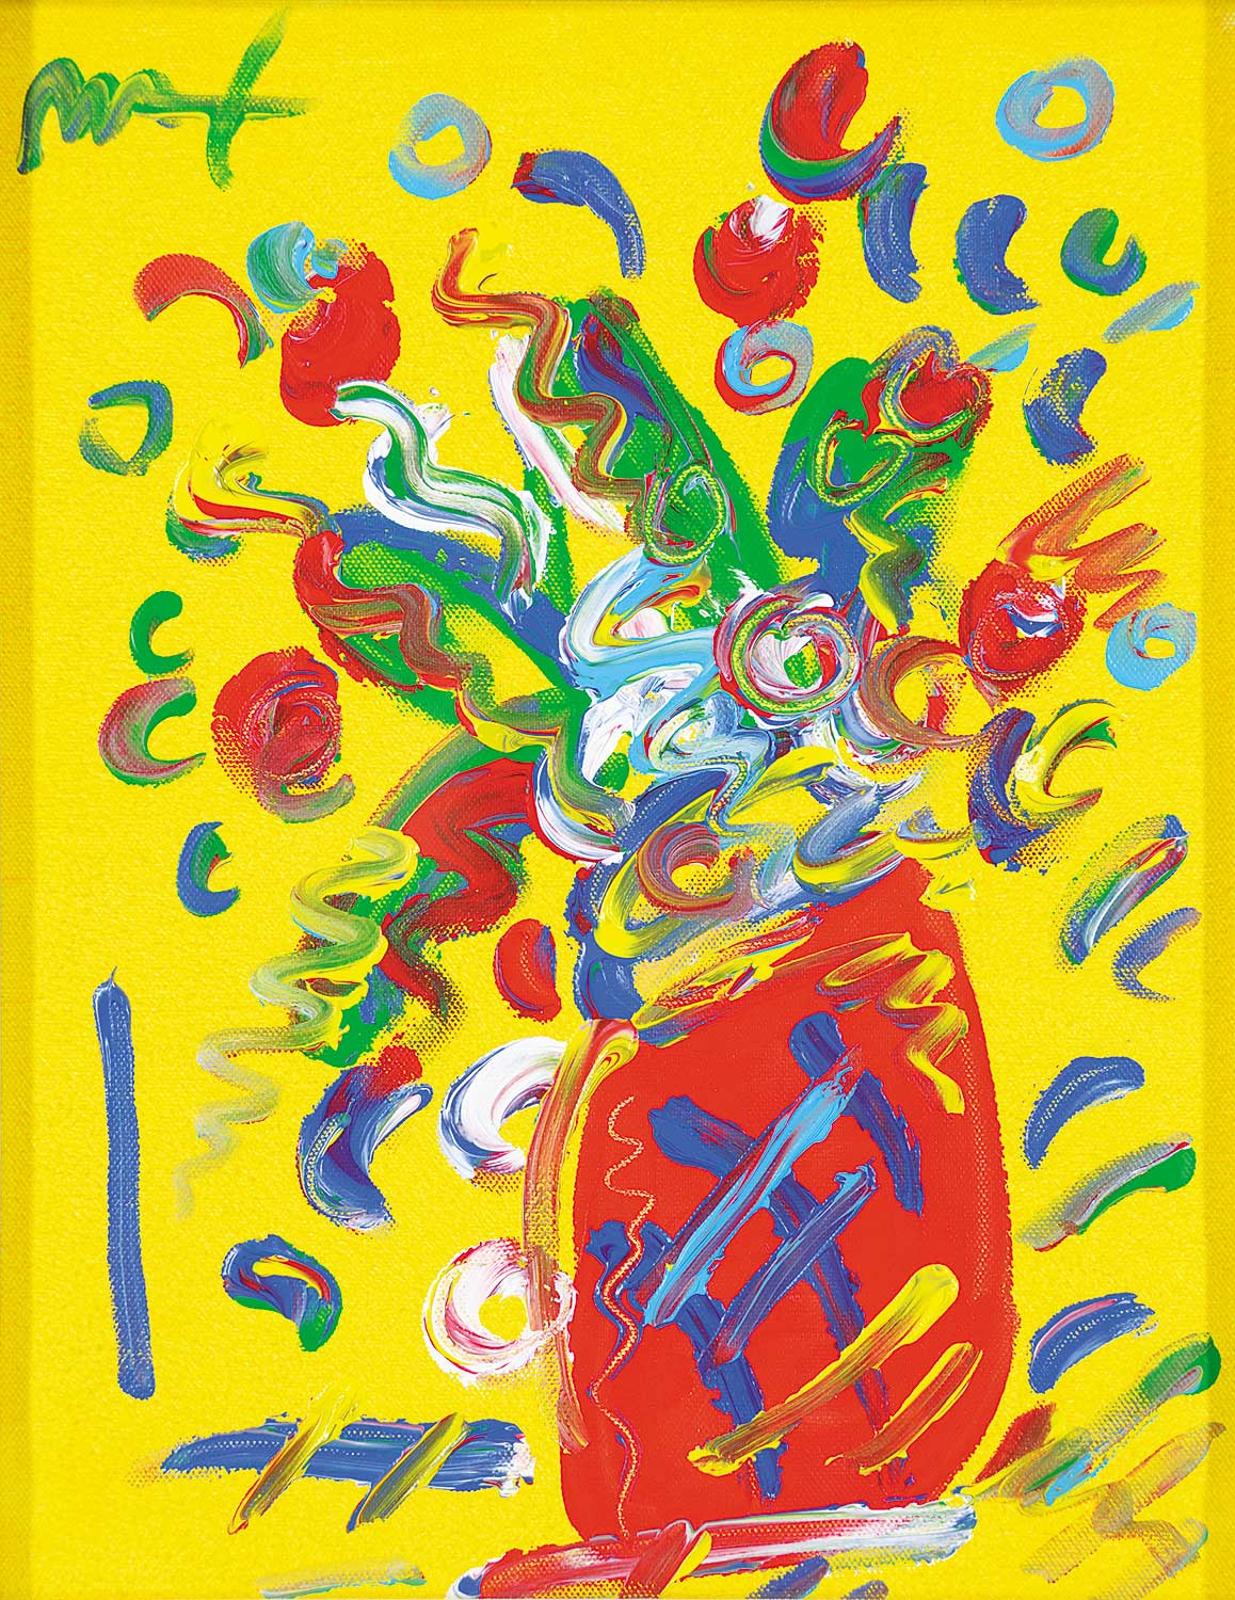 Peter Max (1937) - Untitled - Flowers in a Red Vase with a Yellow Background